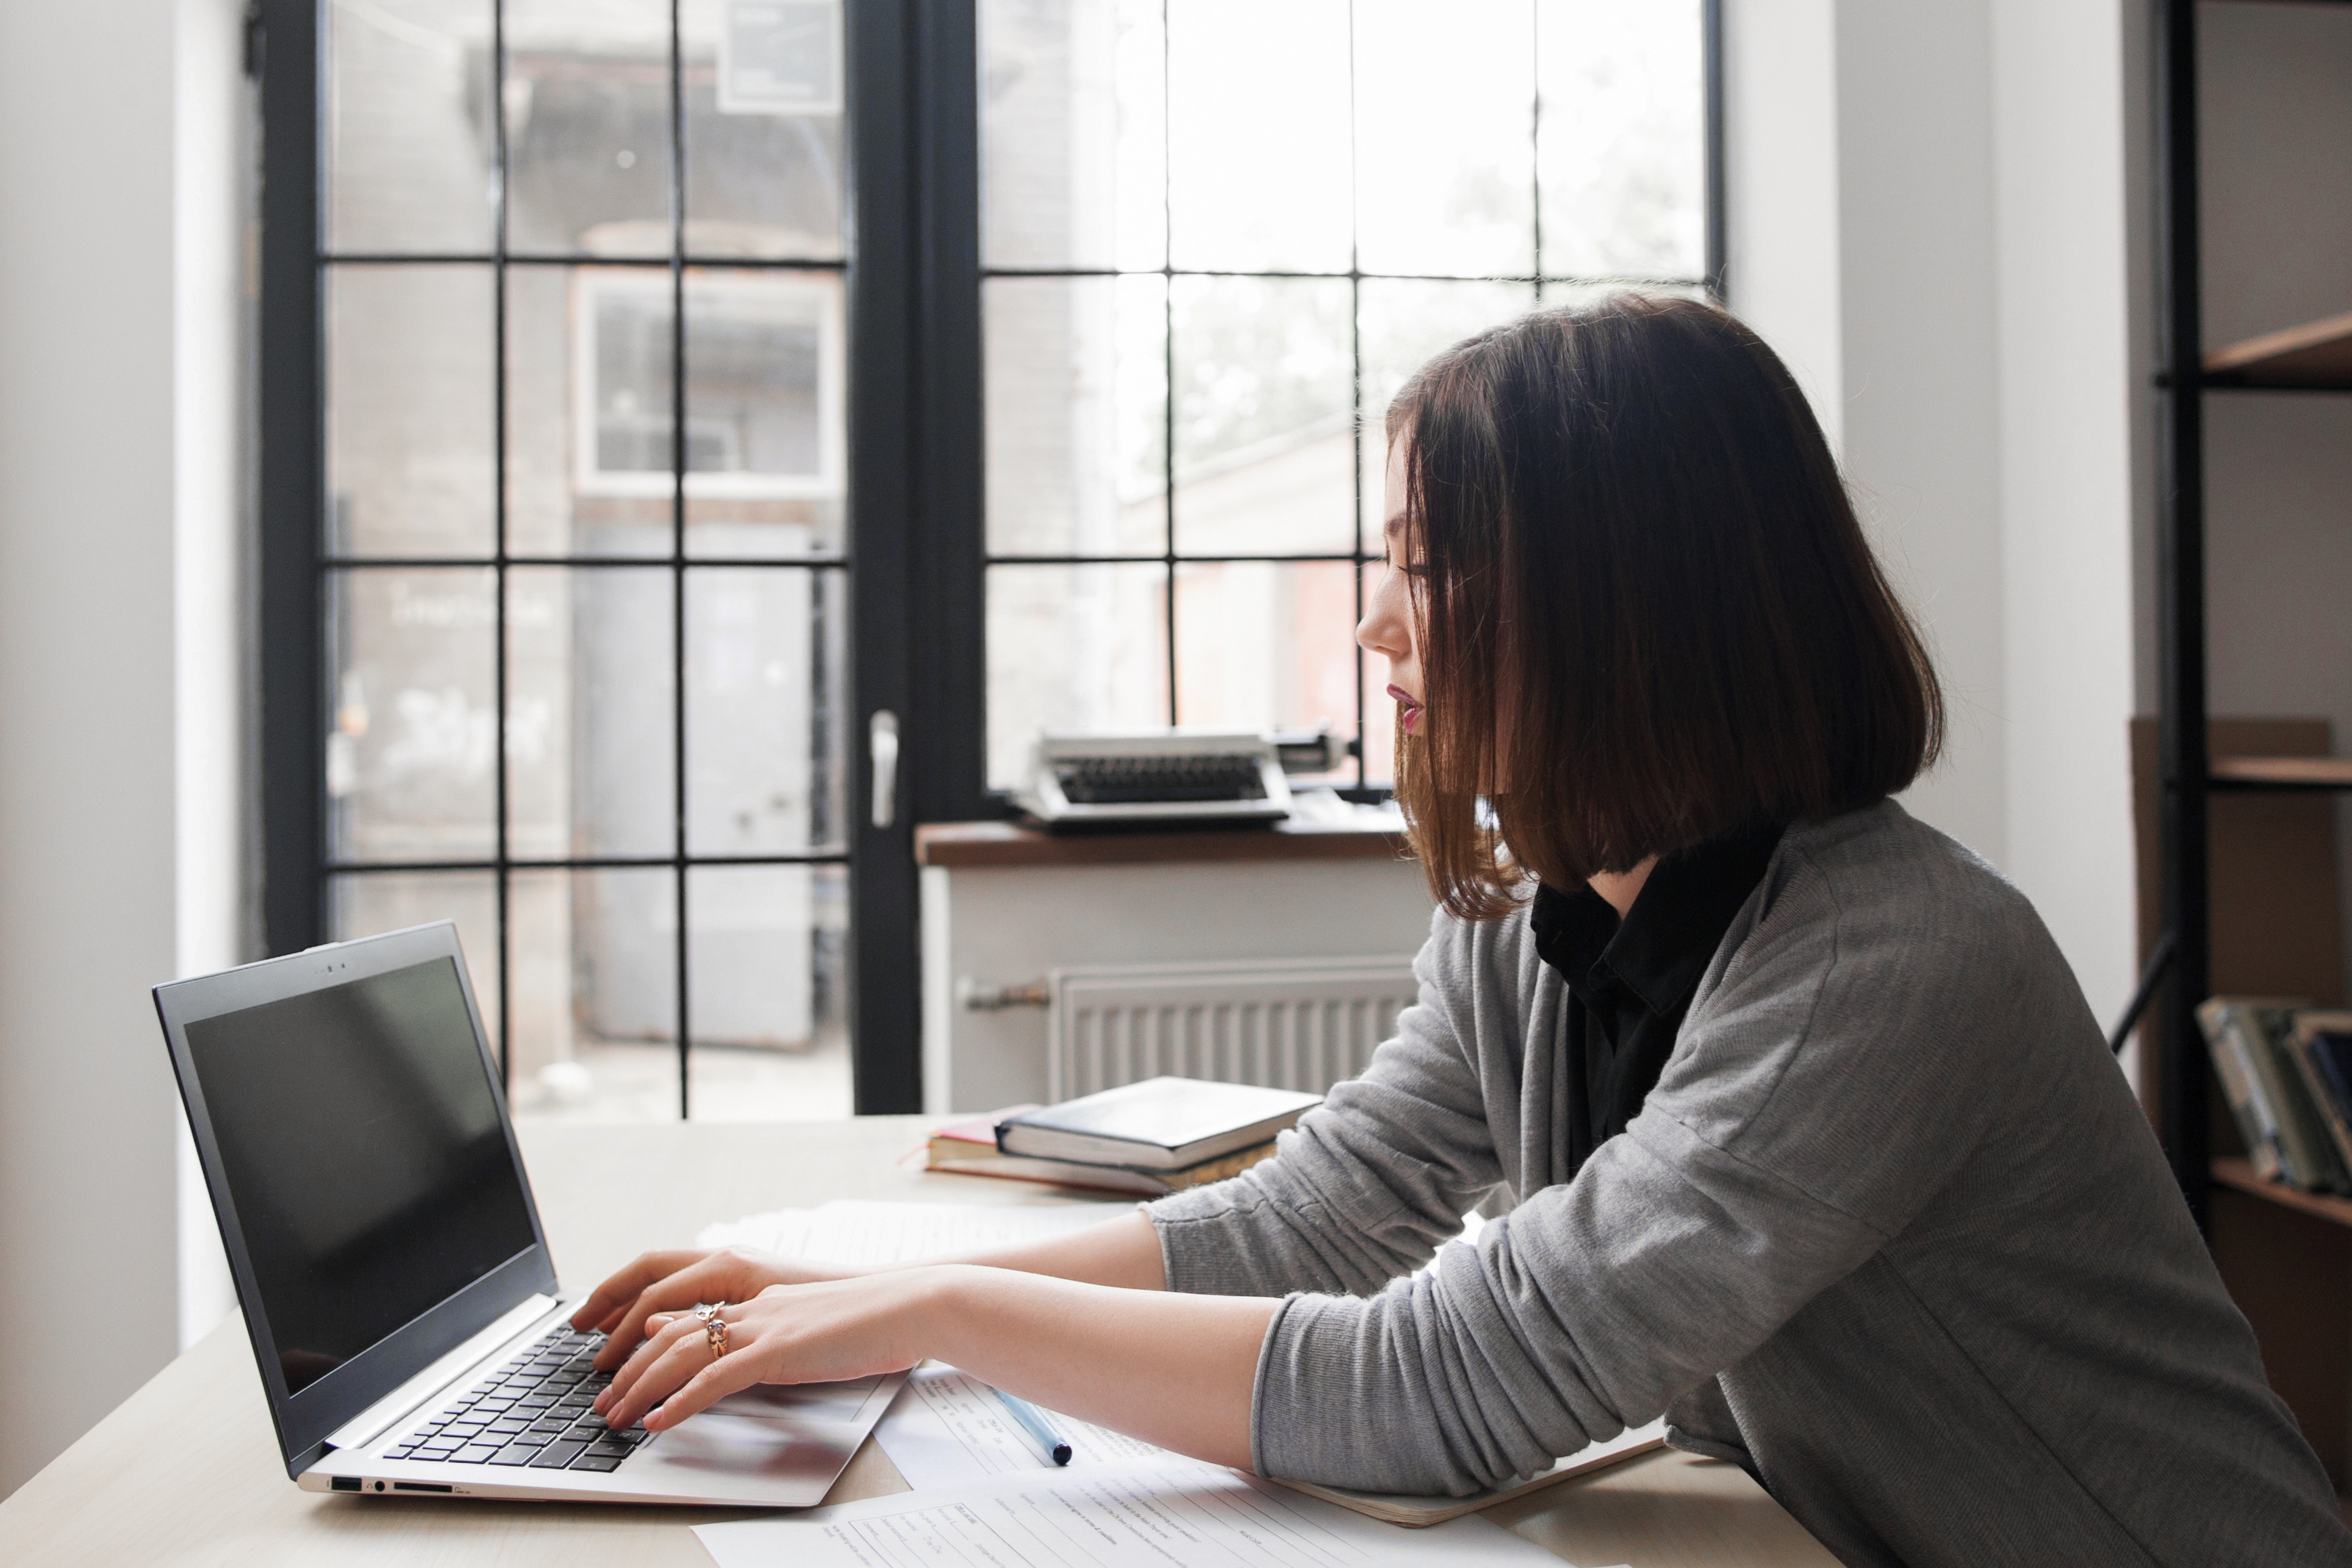 1 in 8 Americans Say Working From Home More Appropriate for Women Than Men